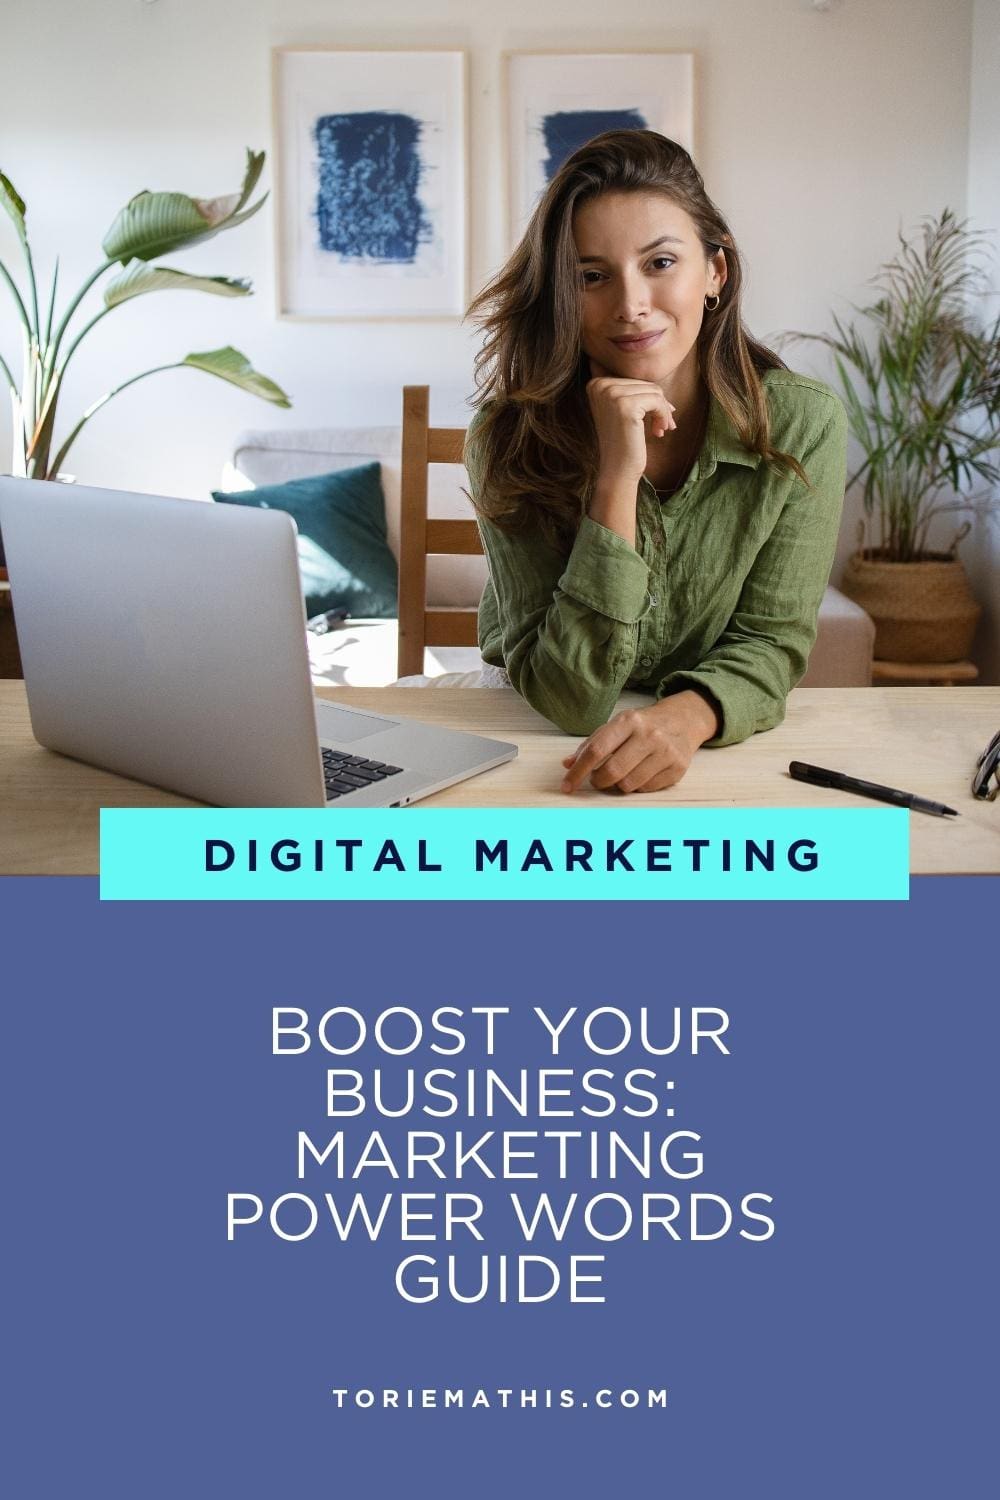 Elevate Your Business Marketing Power Words Guide